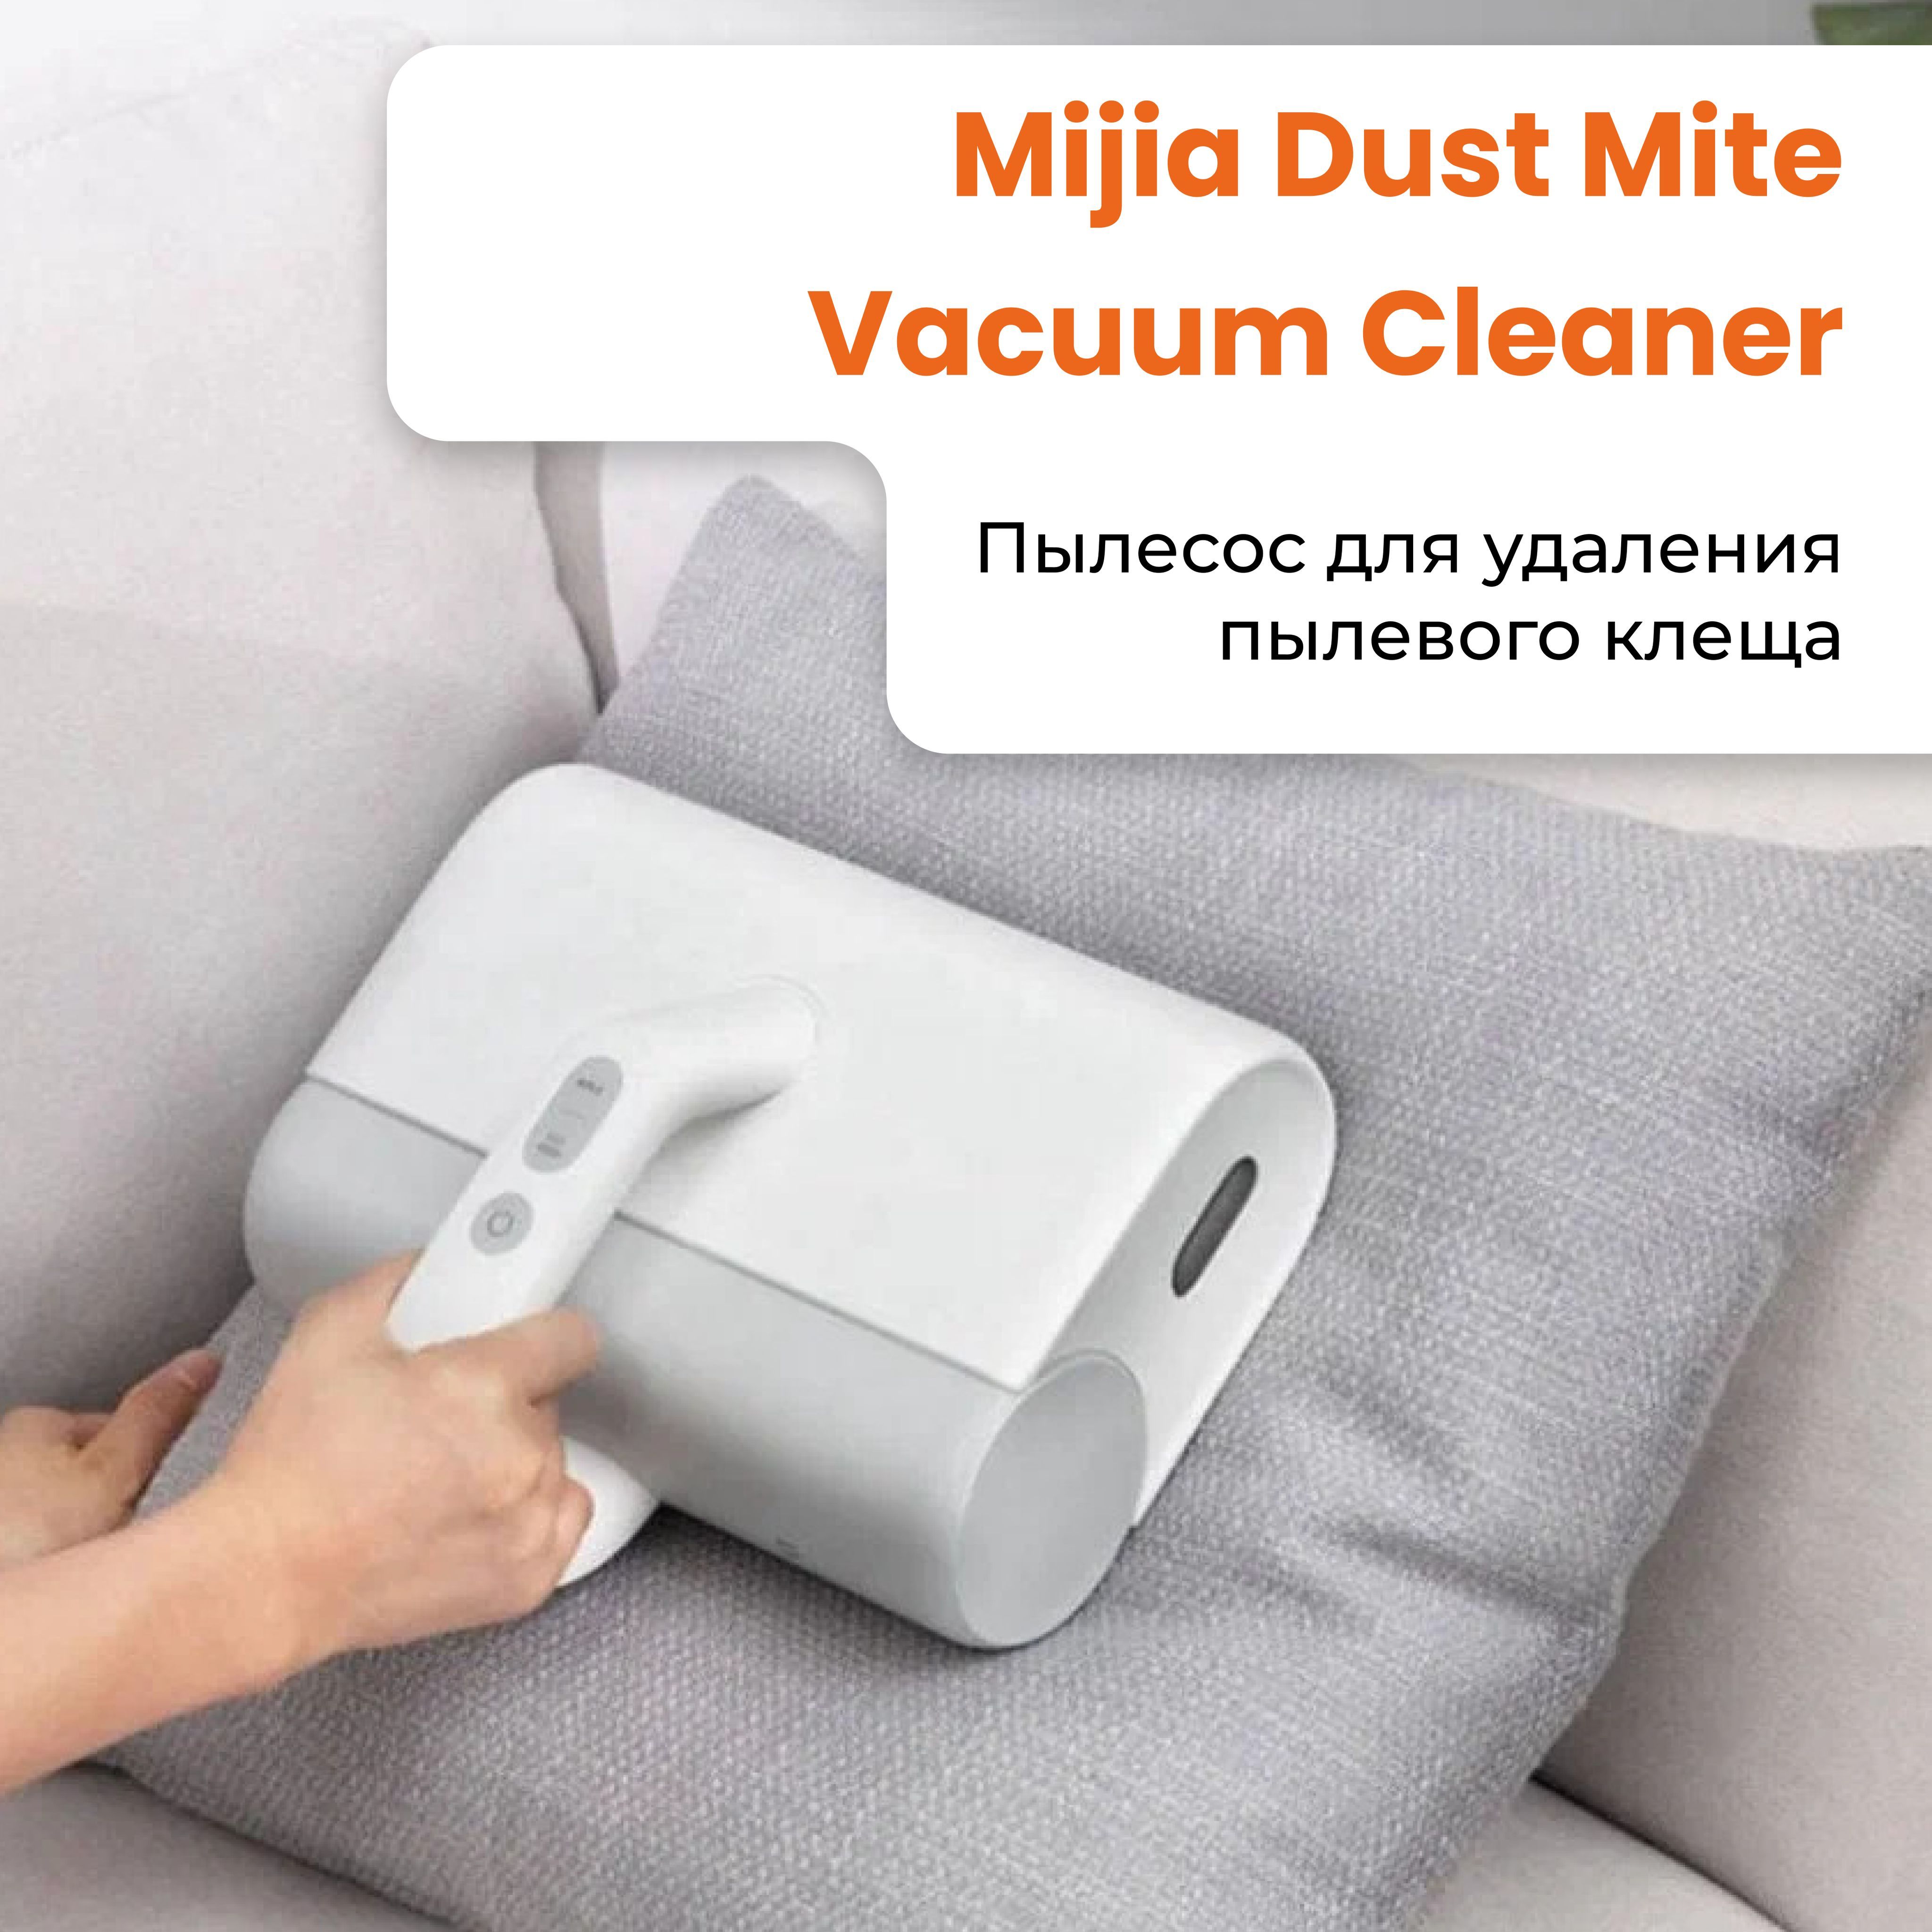 Mijia dust mite vacuum cleaner mjcmy01dy. Xiaomi mjcmy01dy. Пылесос Xiaomi (mjcmy01dy). Xiaomi Dust Mite Vacuum. Xiaomi Dust Mite Vacuum вилка.